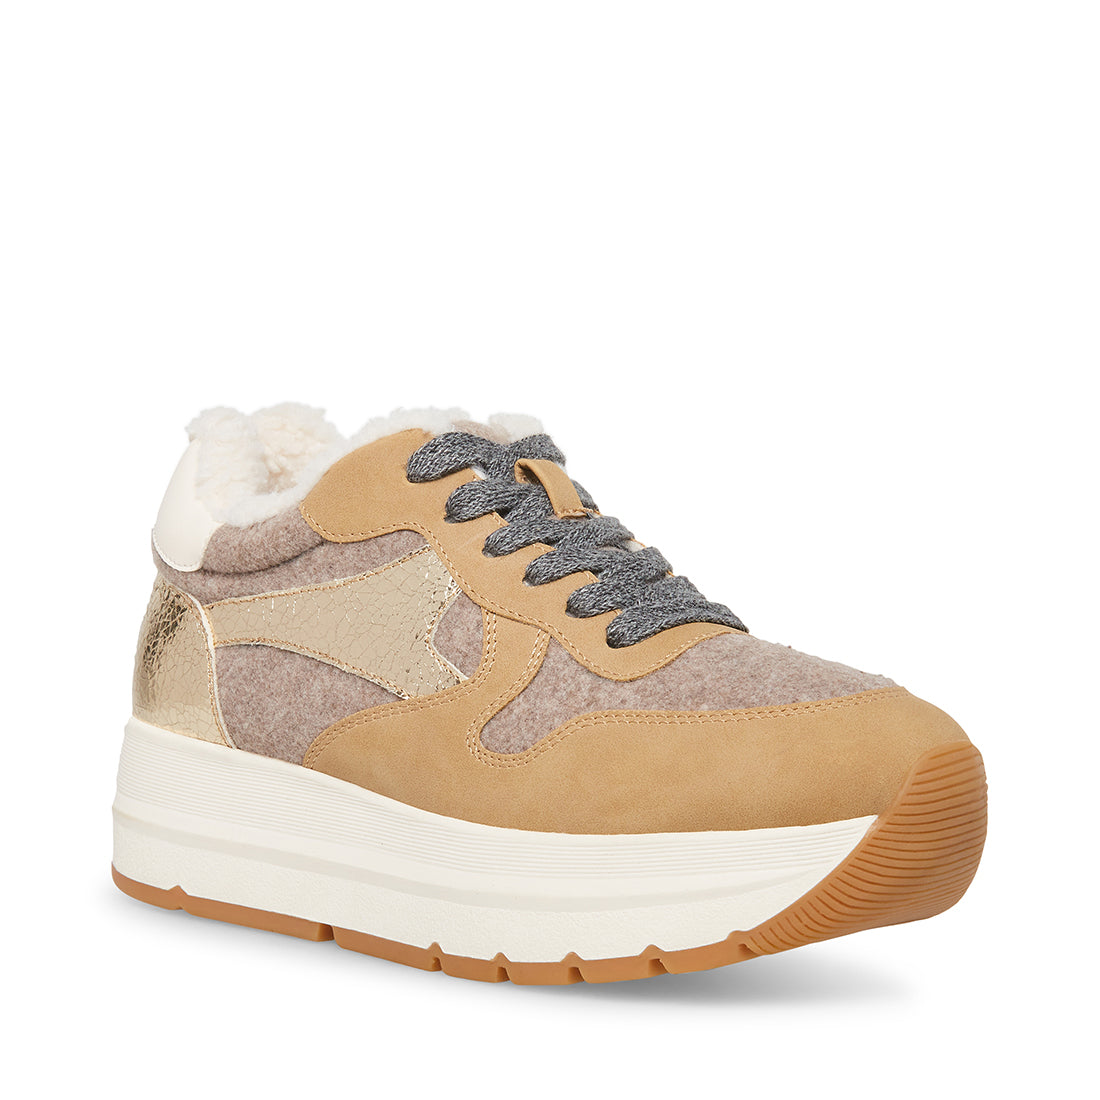 CLAY TAN/MULTI SNEAKERS- Hover Image